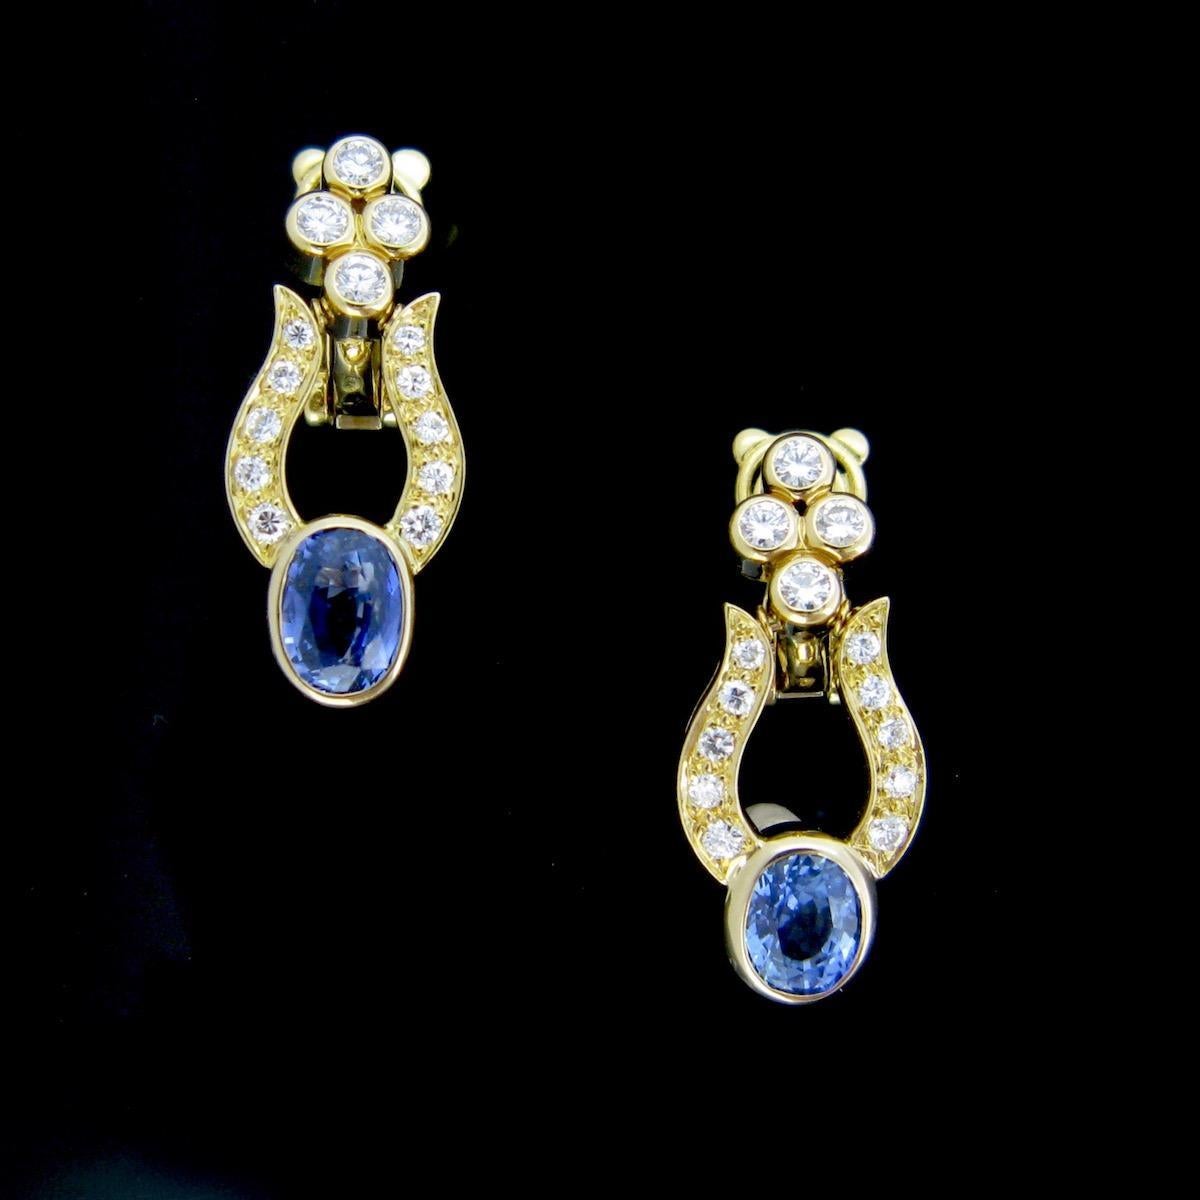 Weight : 9,76 gr

Stones : 2Ceylon Sapphires 
Carat weight: 1.30ct approximately each
Origin: Ceylon (Sri Lanka)
Comments: No indication of heating

Others: Diamonds
Cut: Brilliant
Total carat weight: 2 x 0.50ct approxiamtely

Metal : 18kt yellow